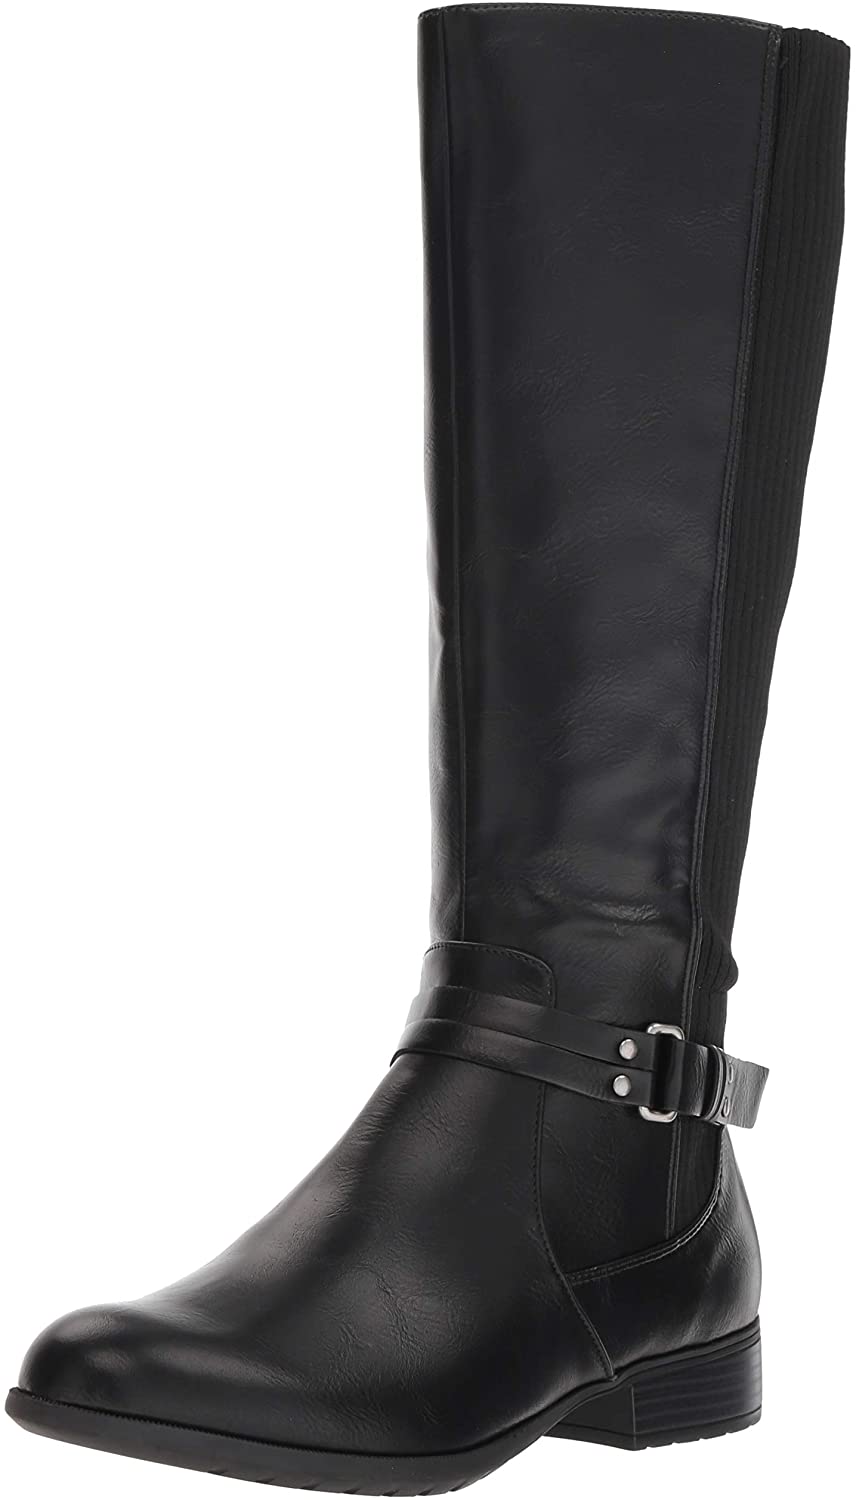 LifeStride X-Anita Women’s Faux Leather Knee High Boots